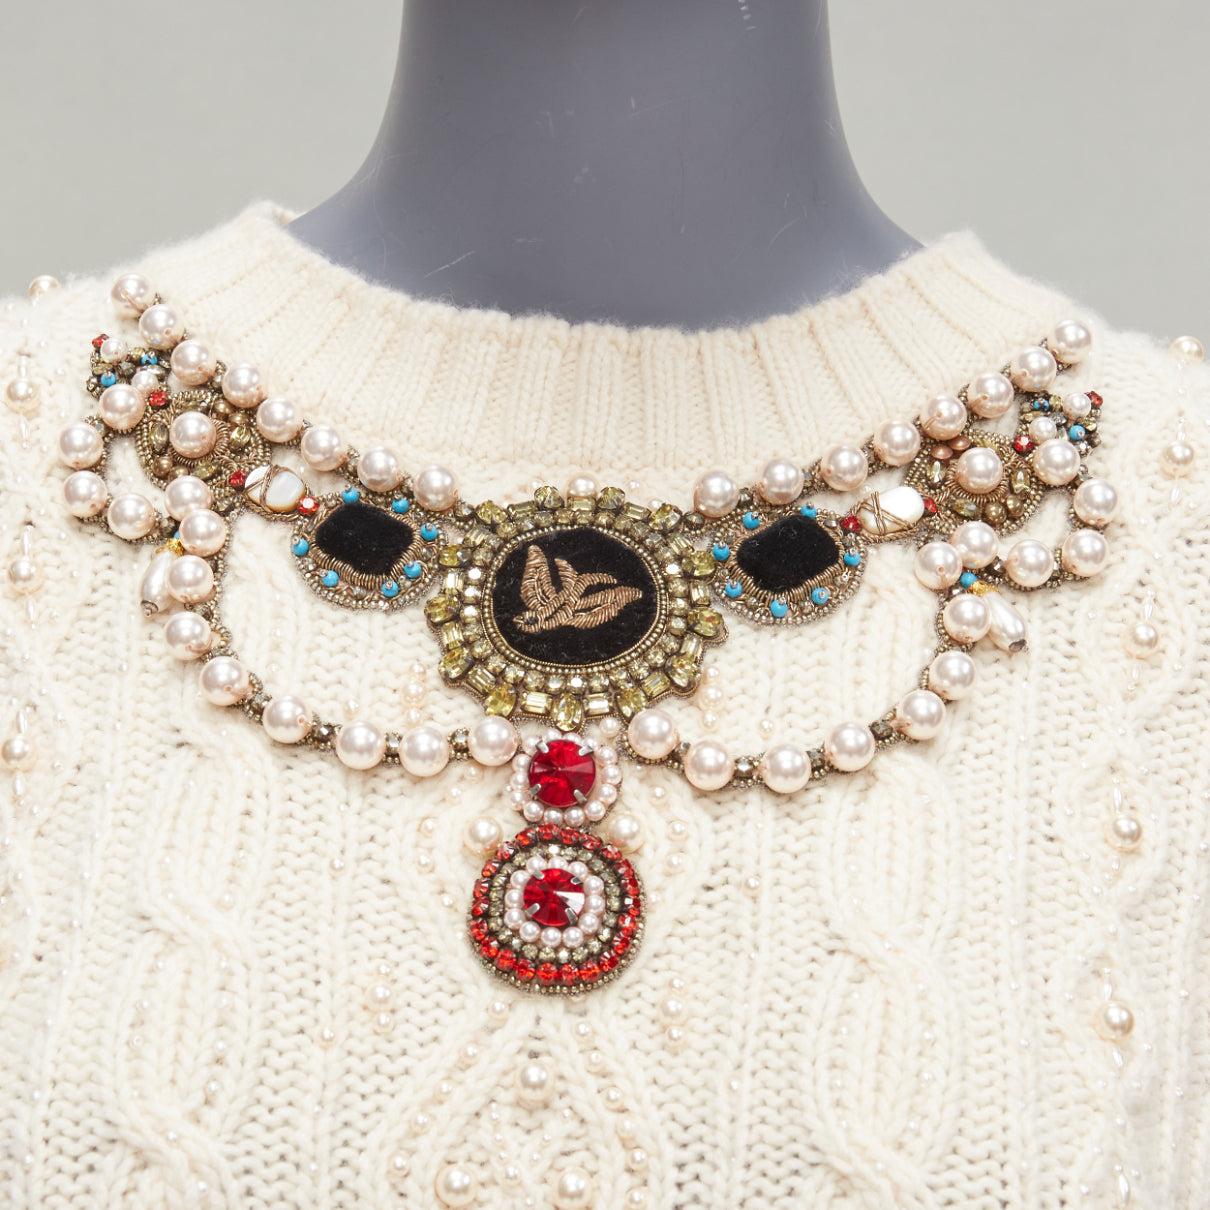 GUCCI 2016 cream wool cashmere faux pearl necklace embellished cable sweater S
Reference: VACN/A00048
Brand: Gucci
Designer: Alessandro Michele
Collection: 2016
Material: Wool, Cashmere
Color: Beige
Pattern: Solid
Closure: Slip On
Extra Details: